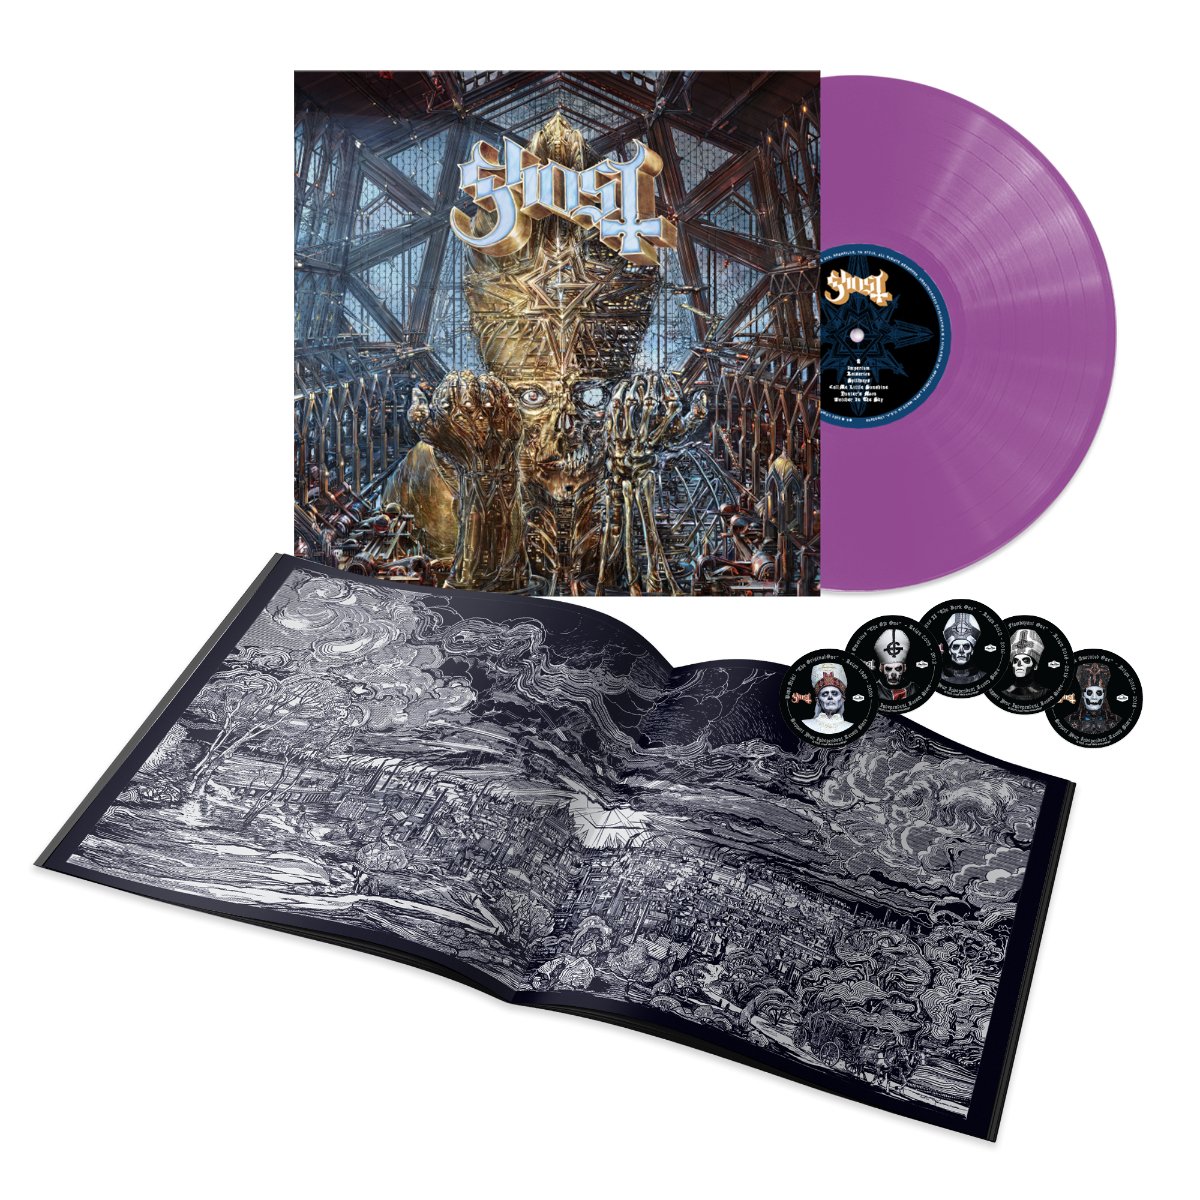 Ghost - Impera (Limited Edition, Colored Vinyl, With Booklet, Sticker, Indie Exclusive) - 888072416734 - LP's - Yellow Racket Records